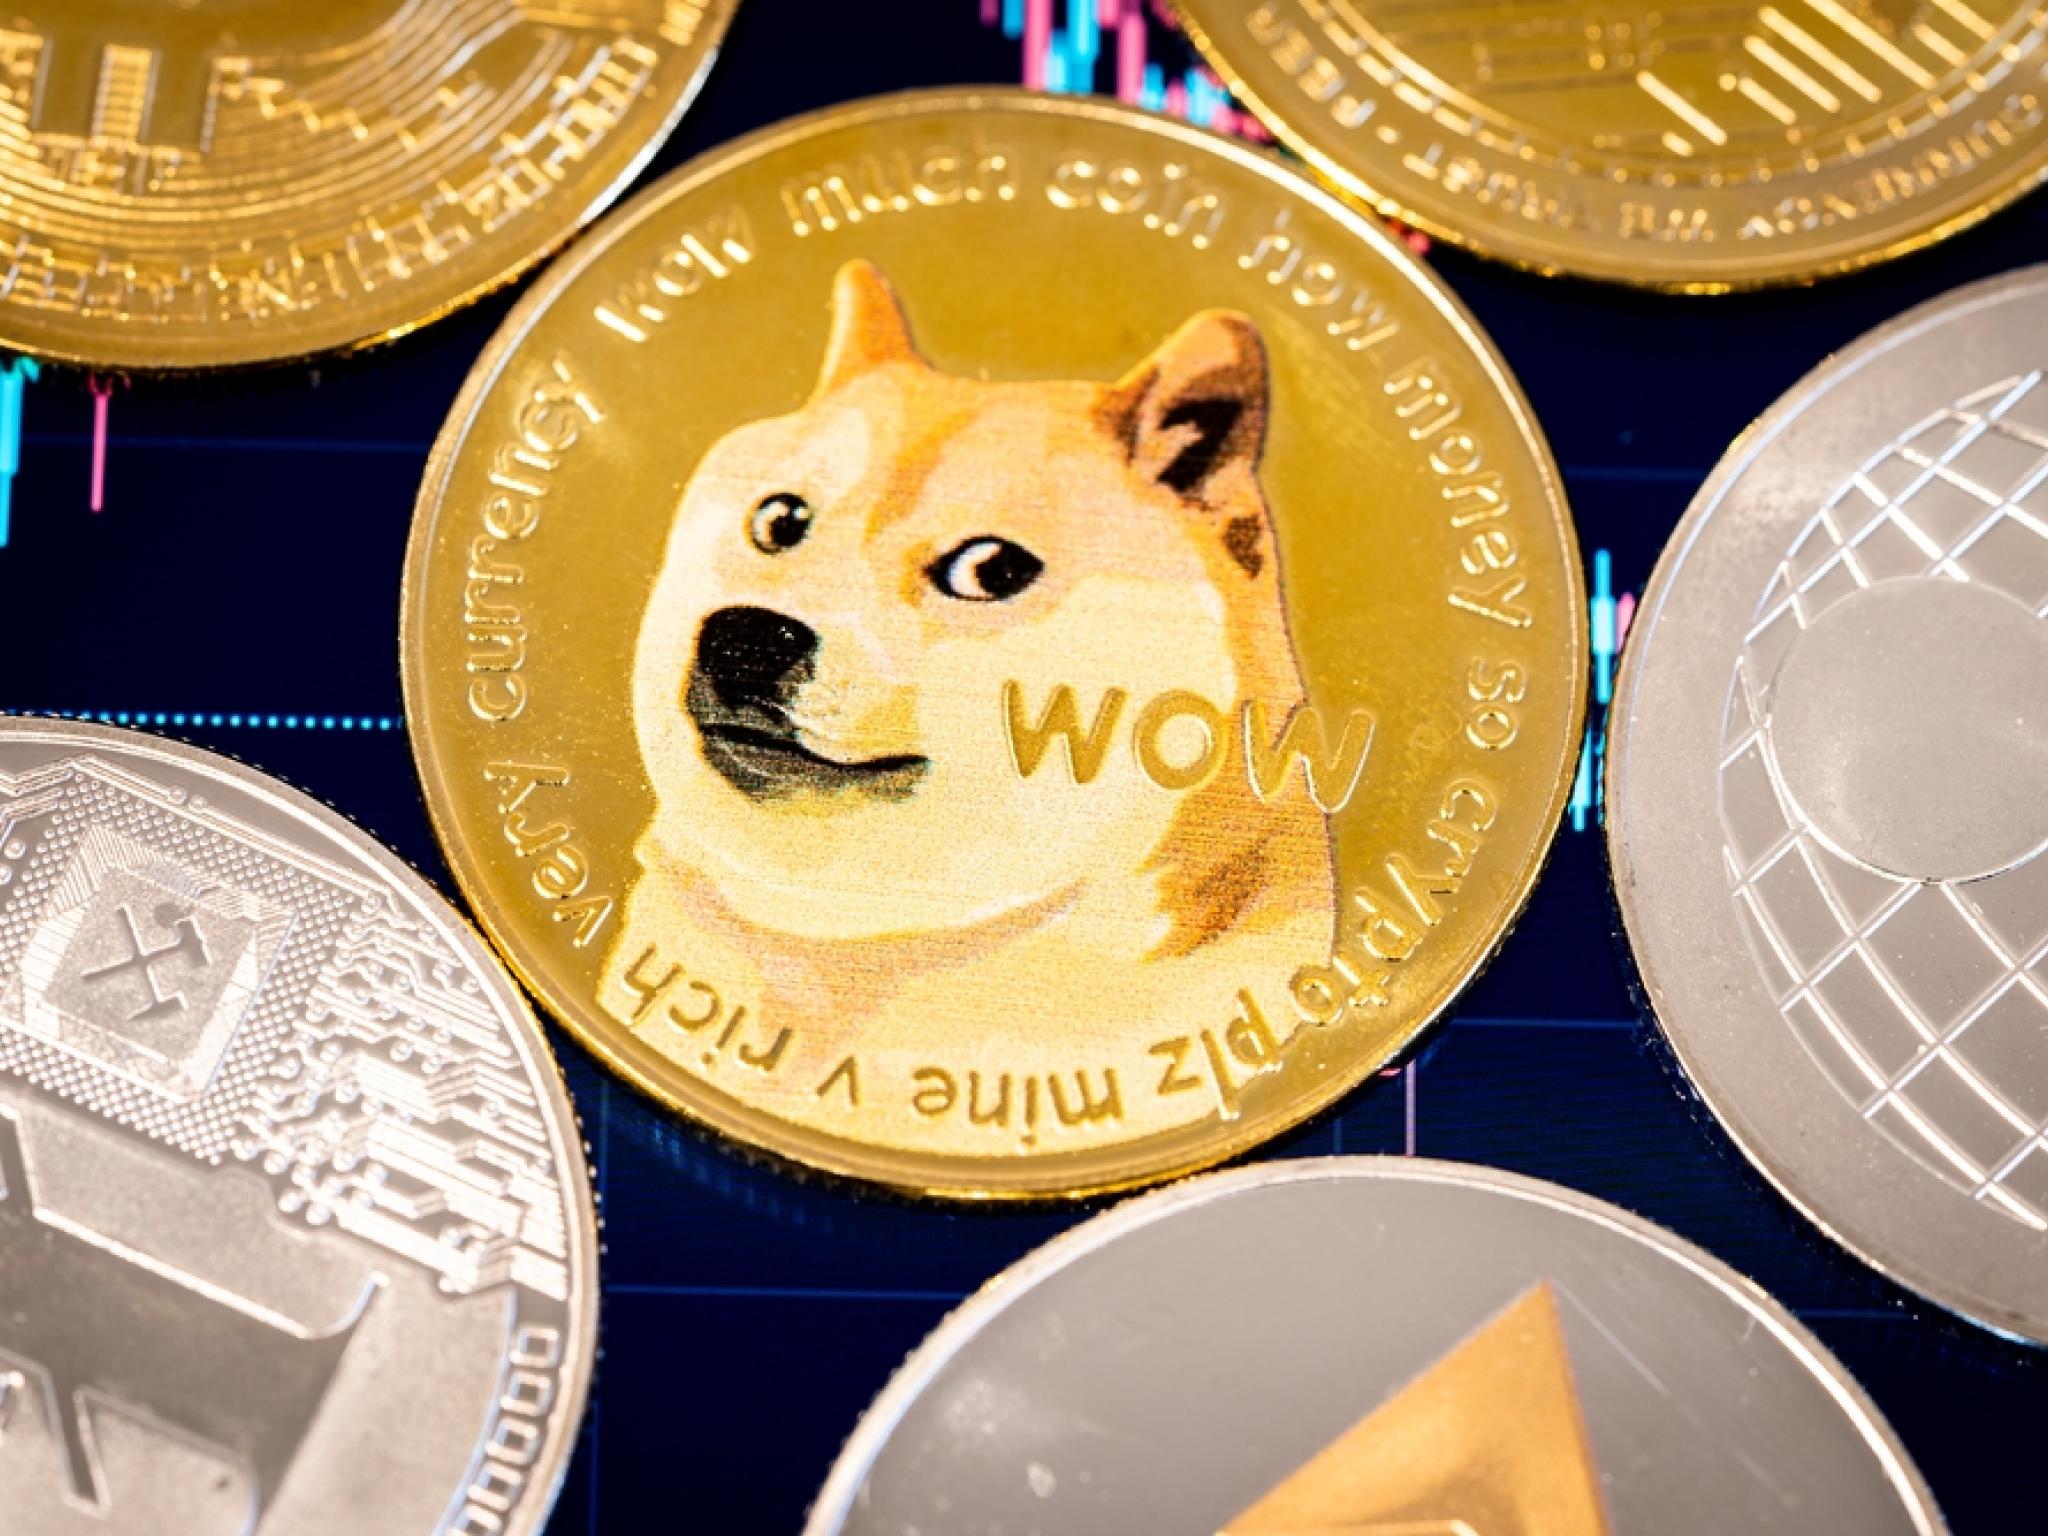  dogecoin-dumps-as-whales-move-400-million-coins-trader-predicts-next-will-be-a-huge-rebound 